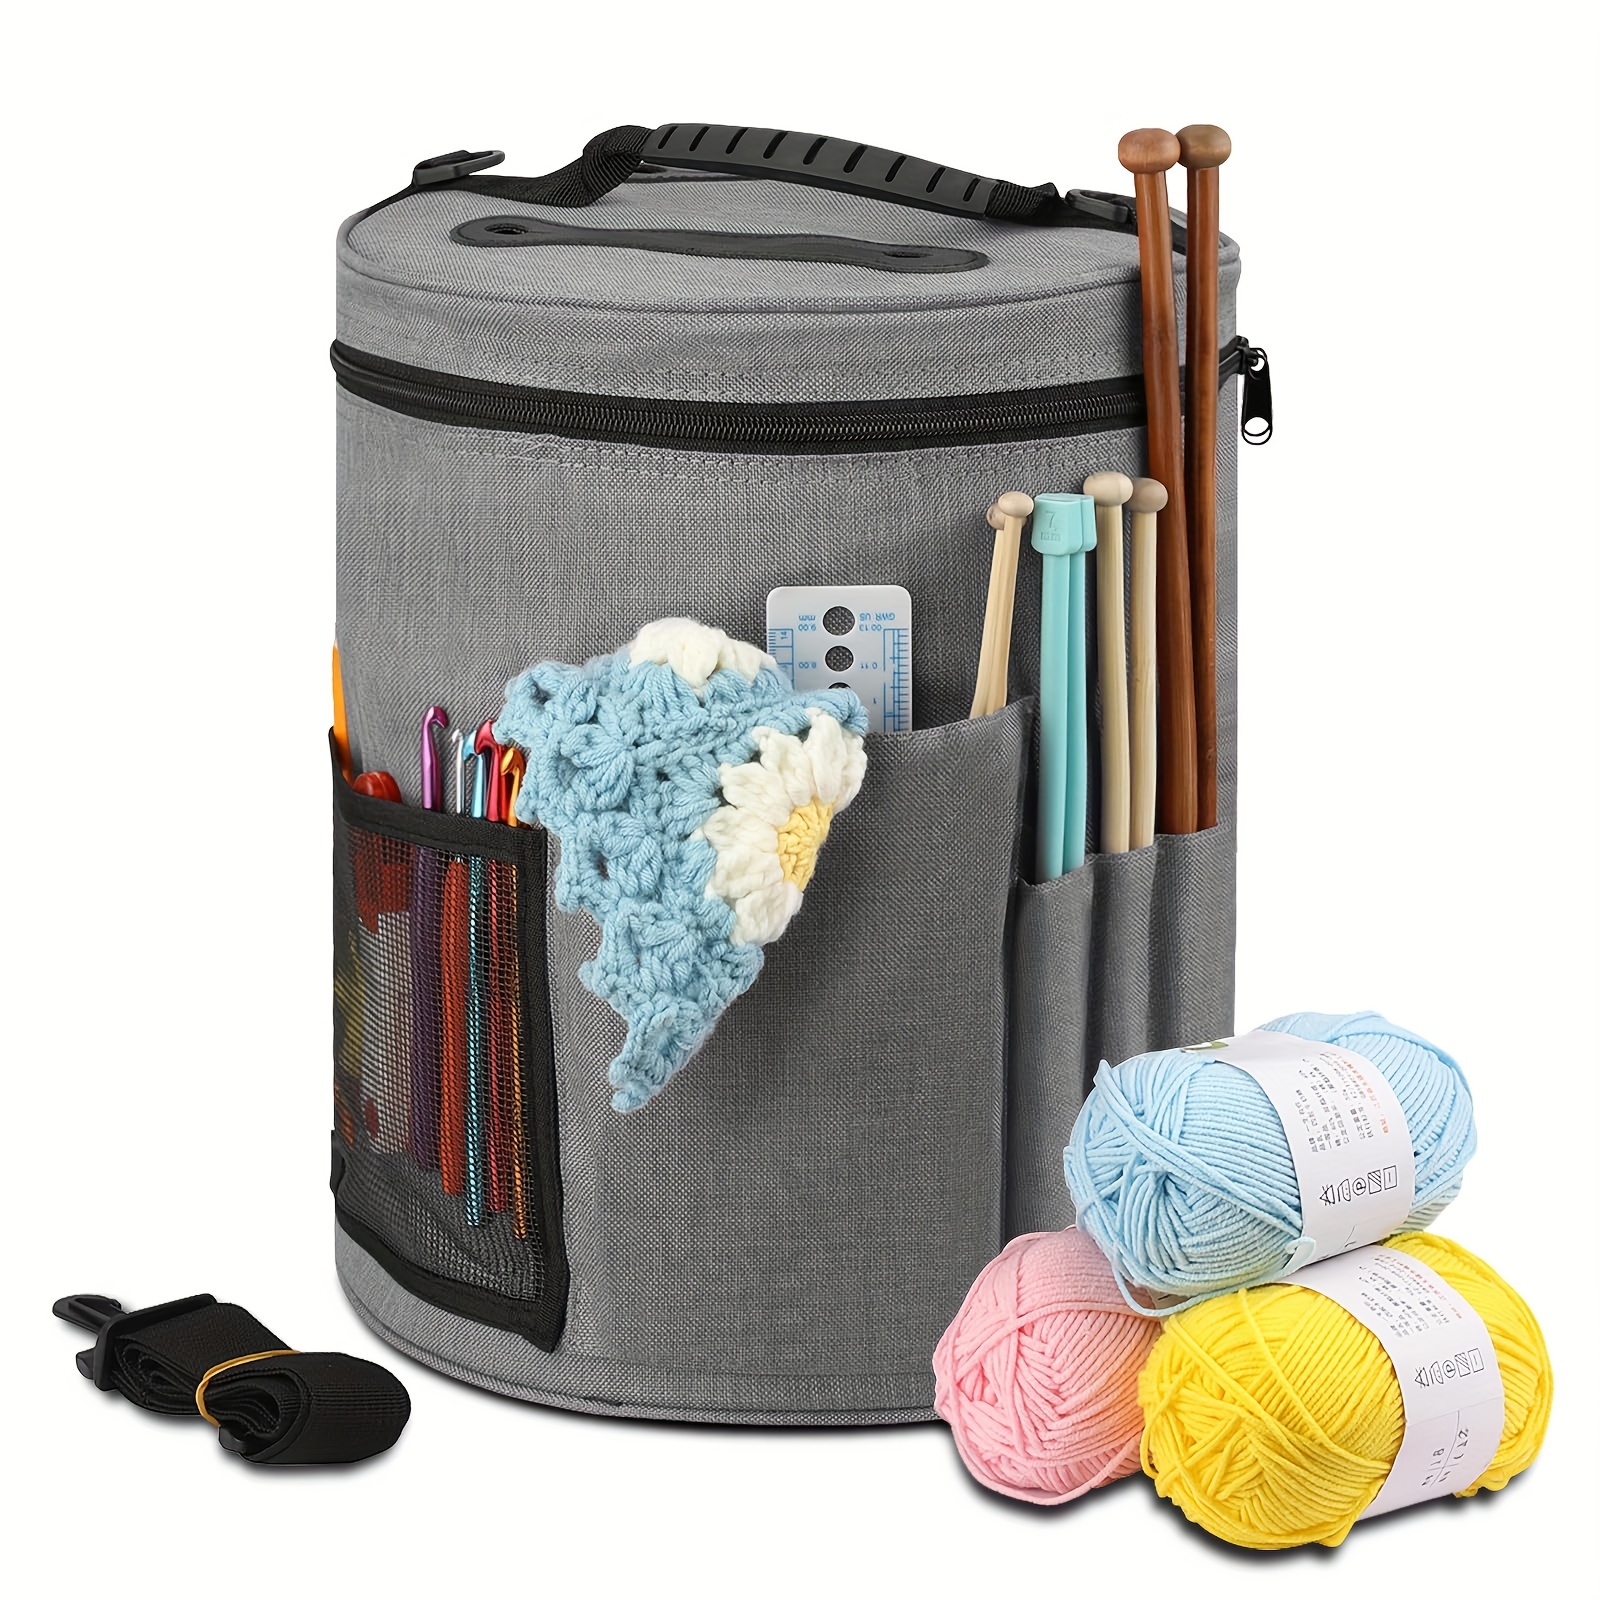 

Large Capacity Crochet Bag: Yarn Storage, Knitting Needle Organizer, Crochet Tote Bag With Front Pocket For Yarn, Hooks, And Needles - Durable And Lightweight